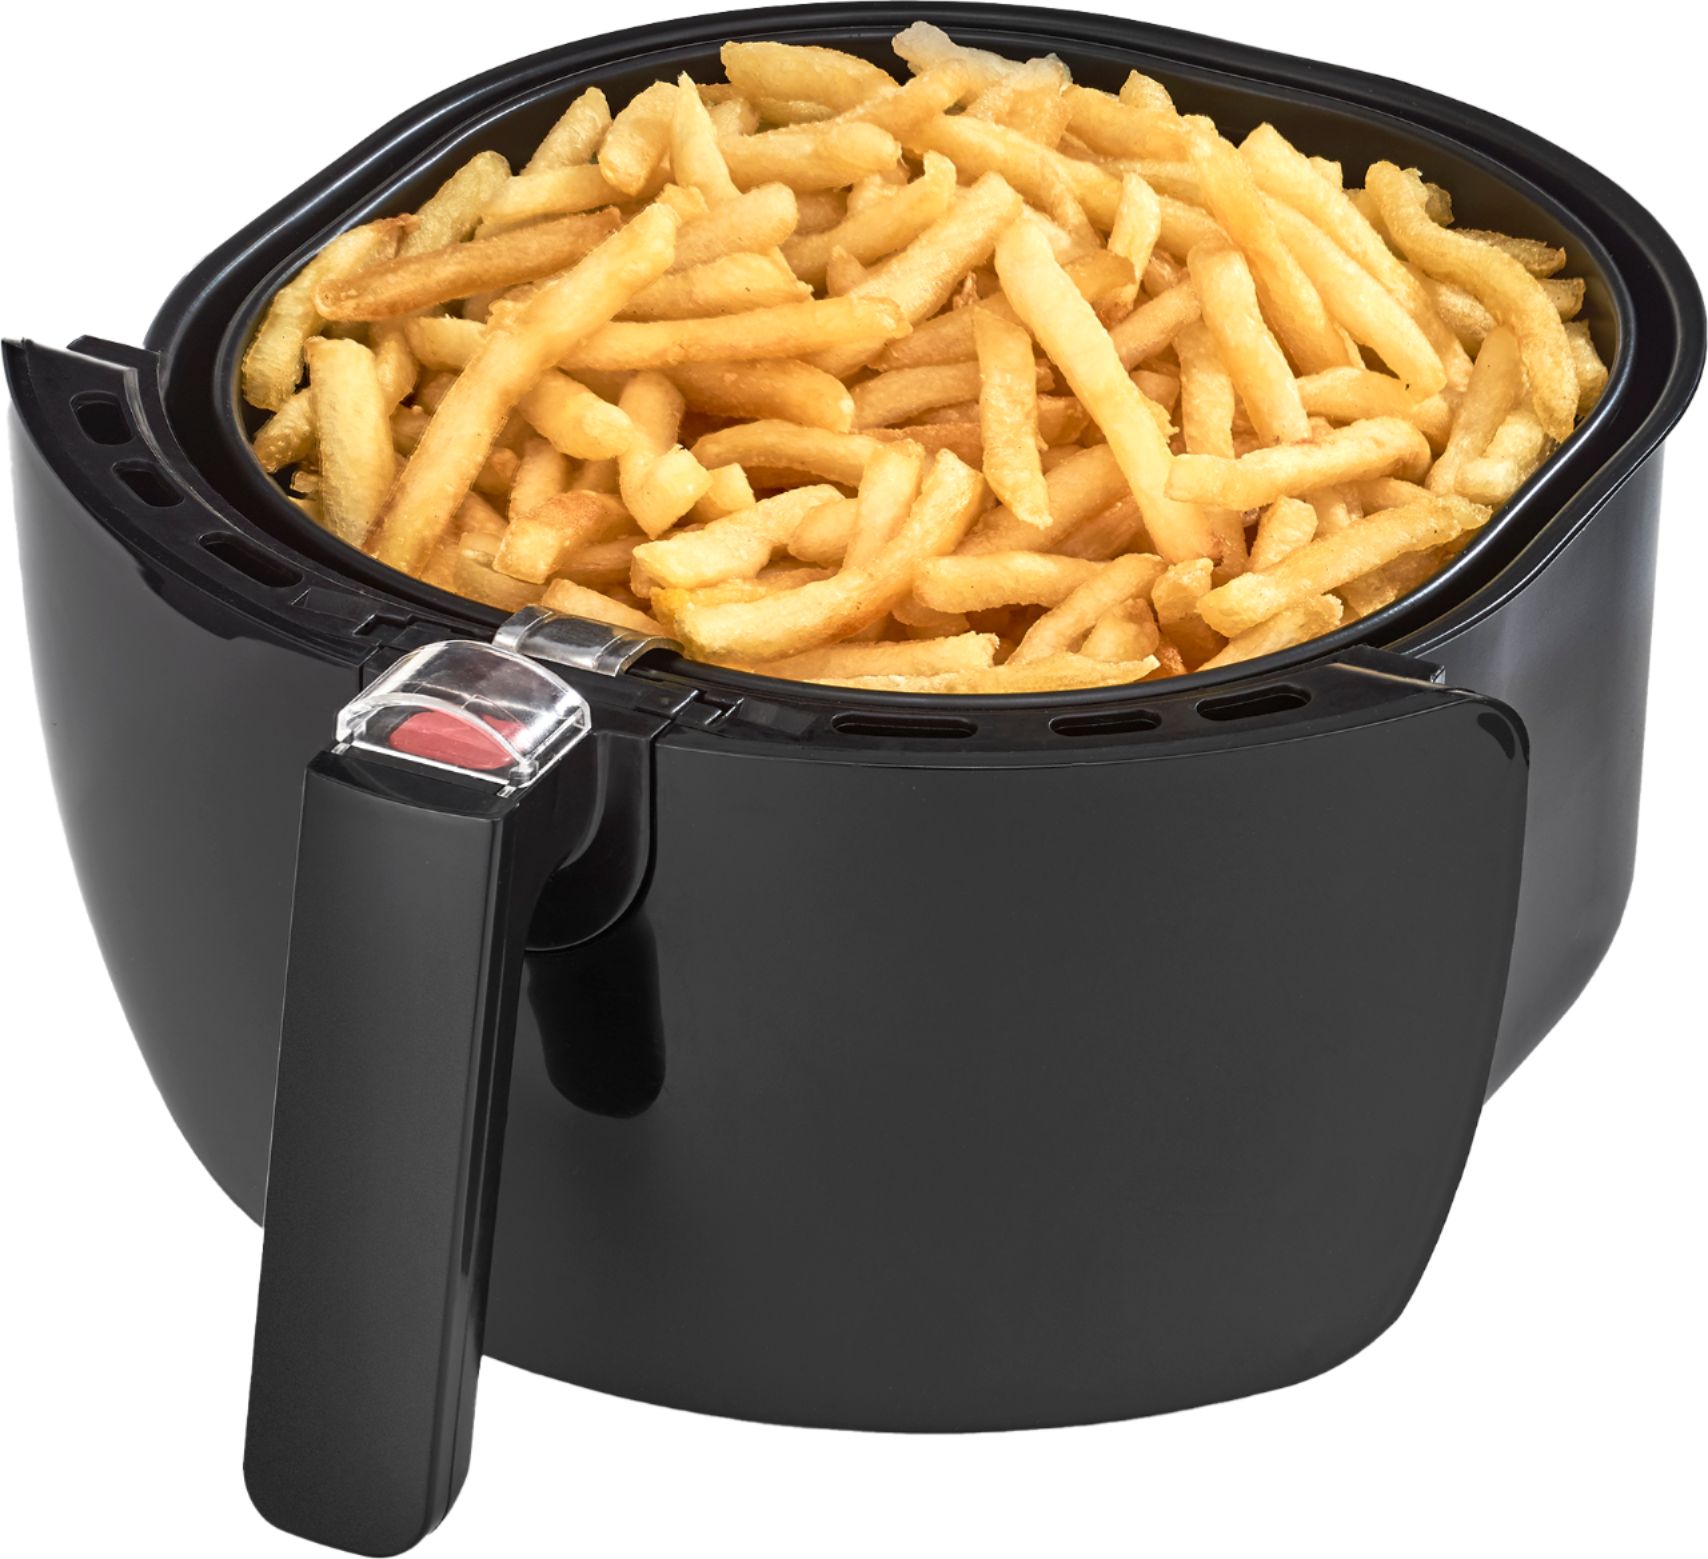 TILUXURY Digital Touch Screen Air Fryer 1400W (Large 5L Oven) 220 volts NOT  FOR USA